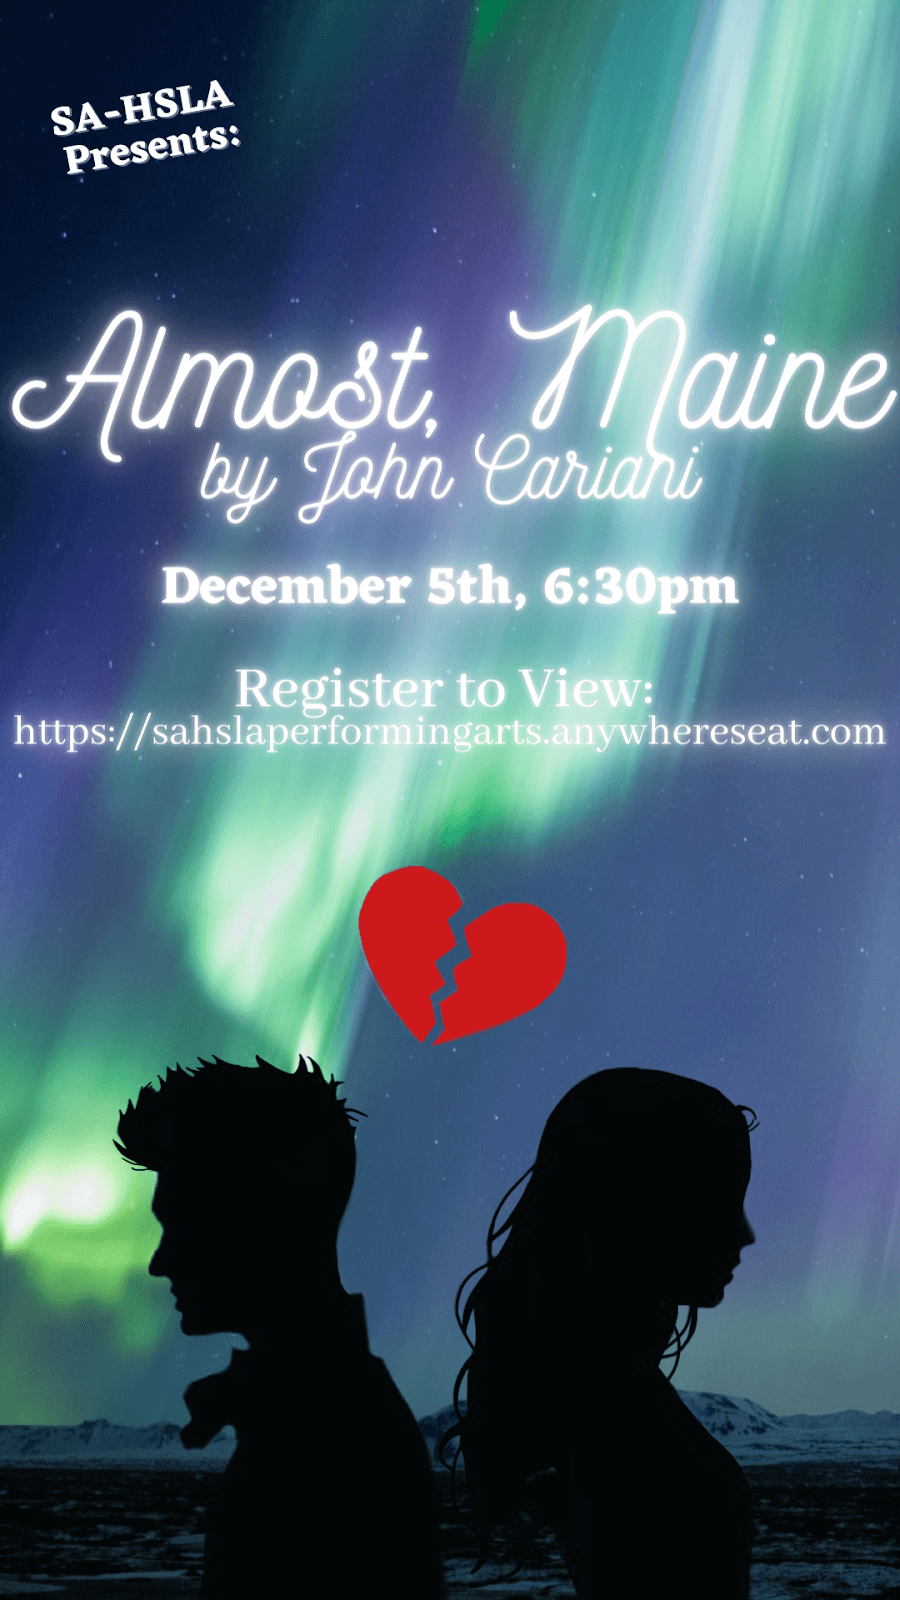 copy-of-almost-maine-by-john-cariani-november-14th-6_30pm